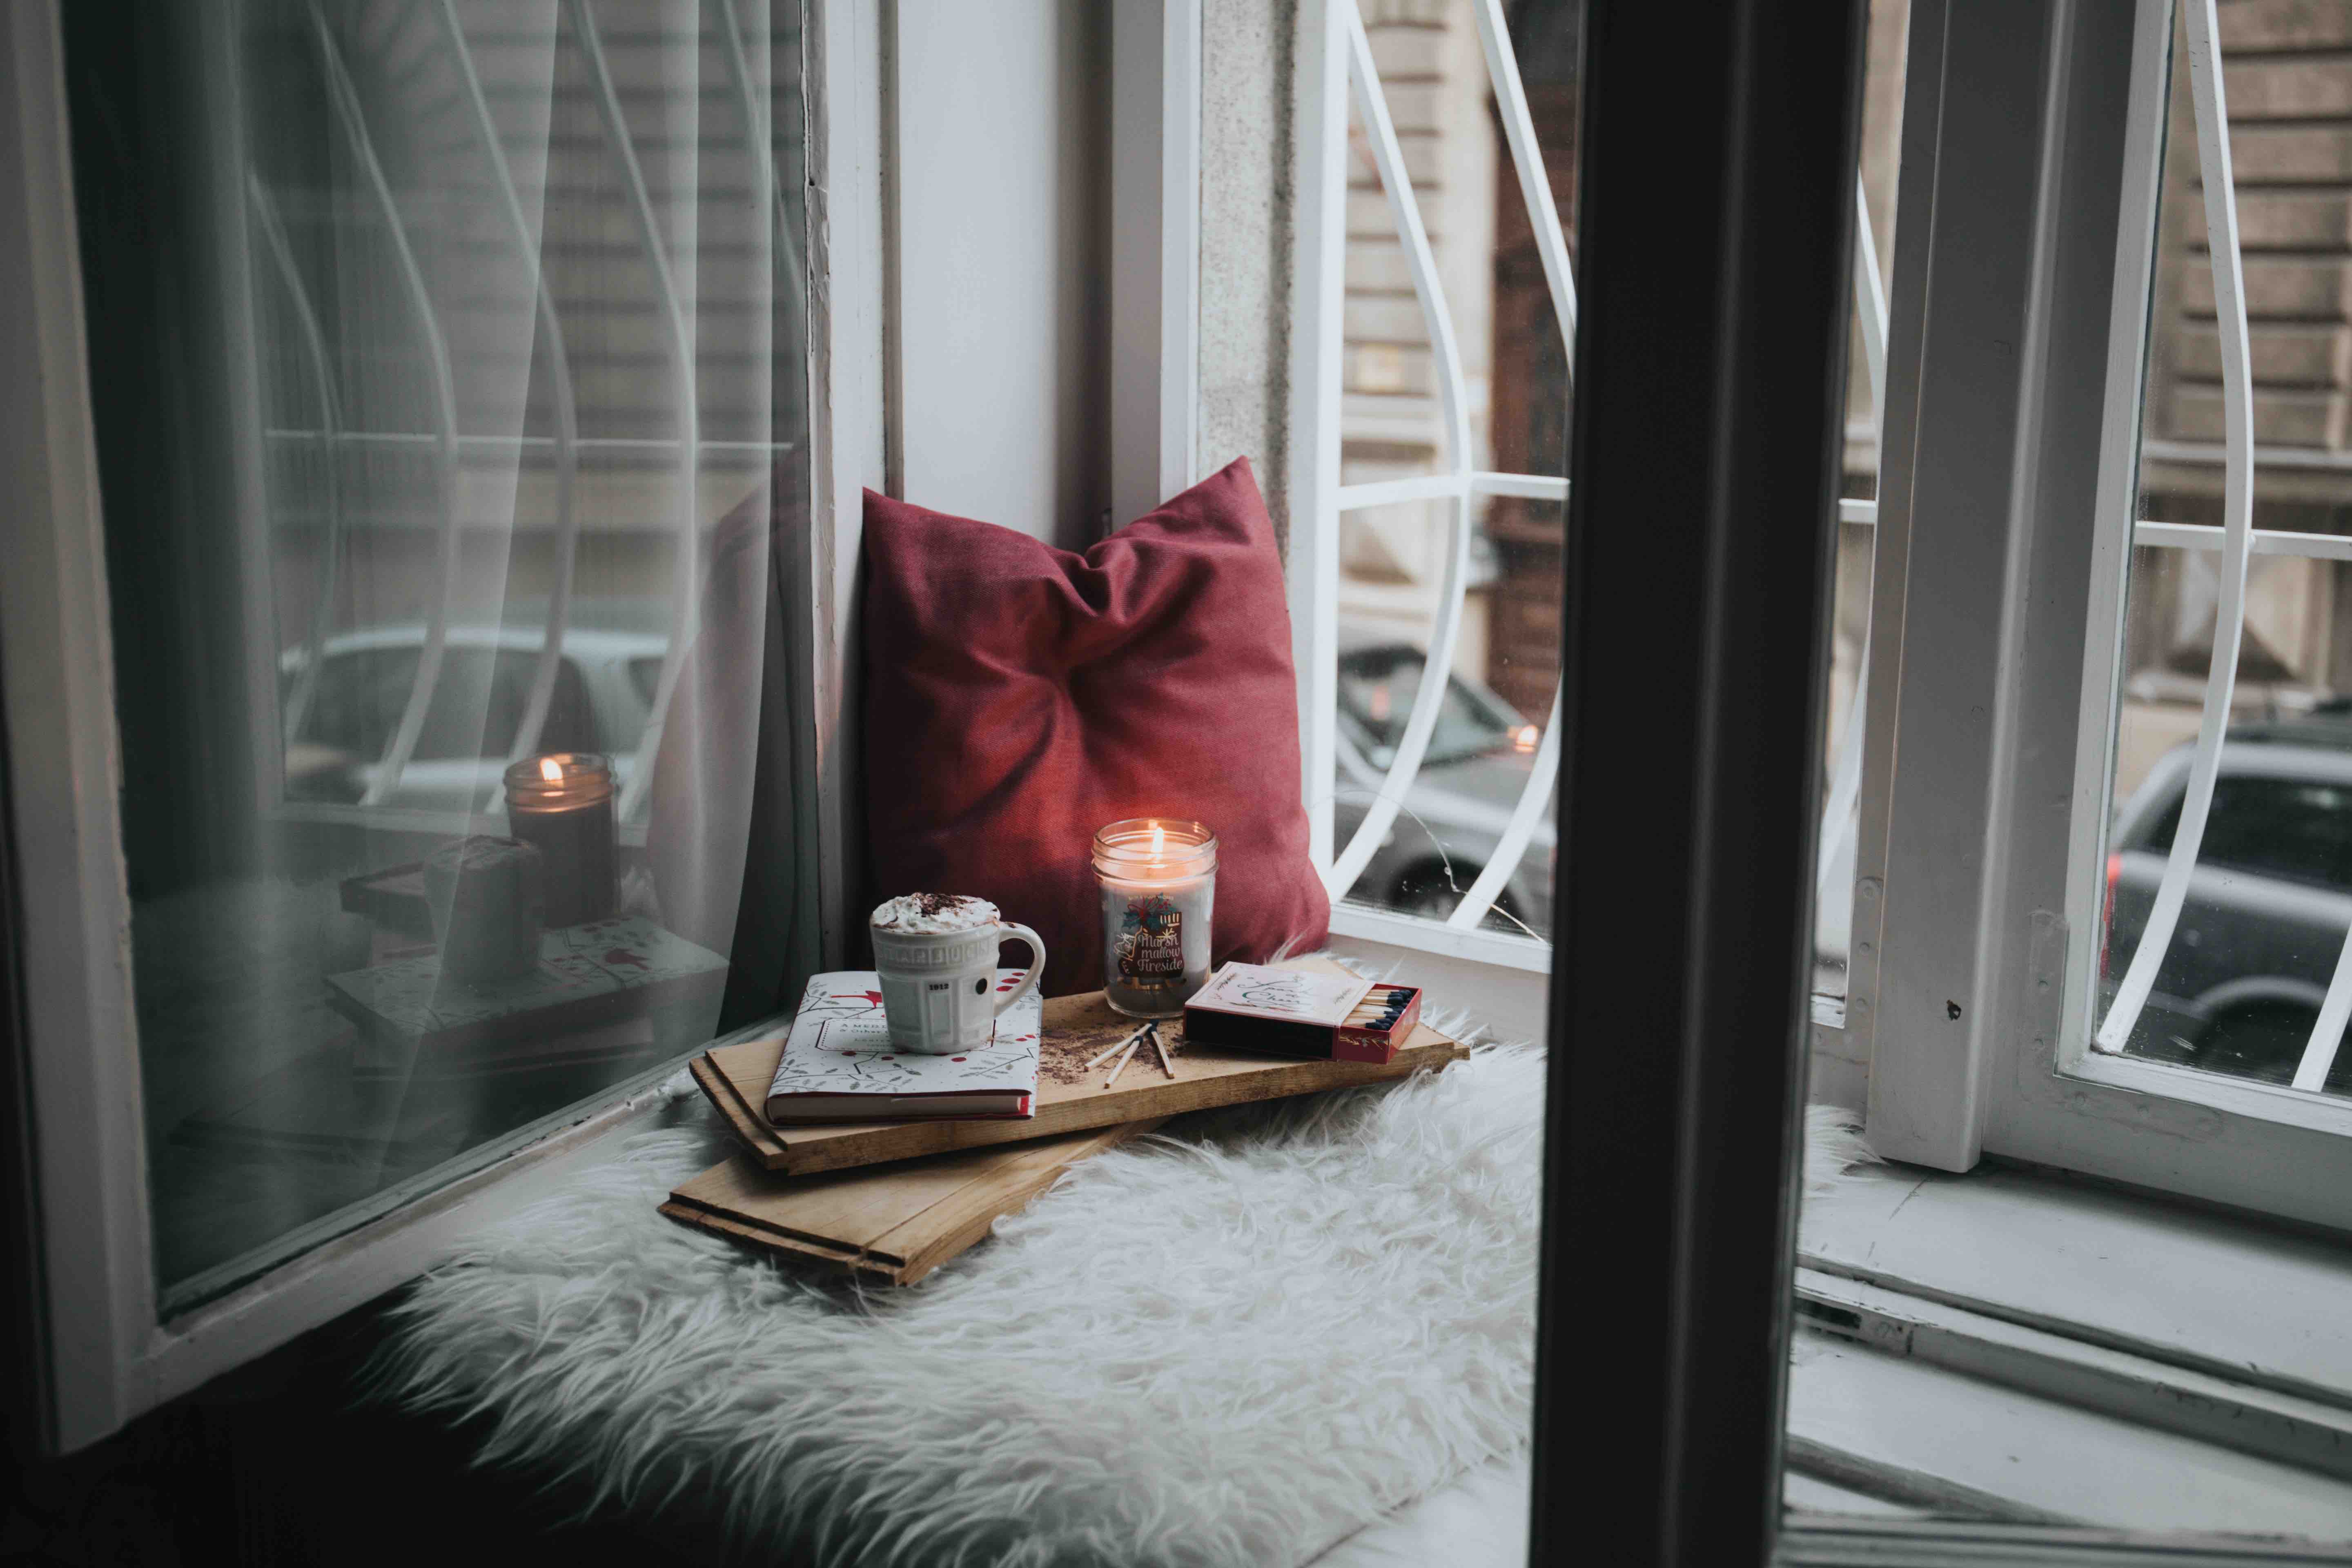 Cozy corner at home with a candle, books, and a pillow